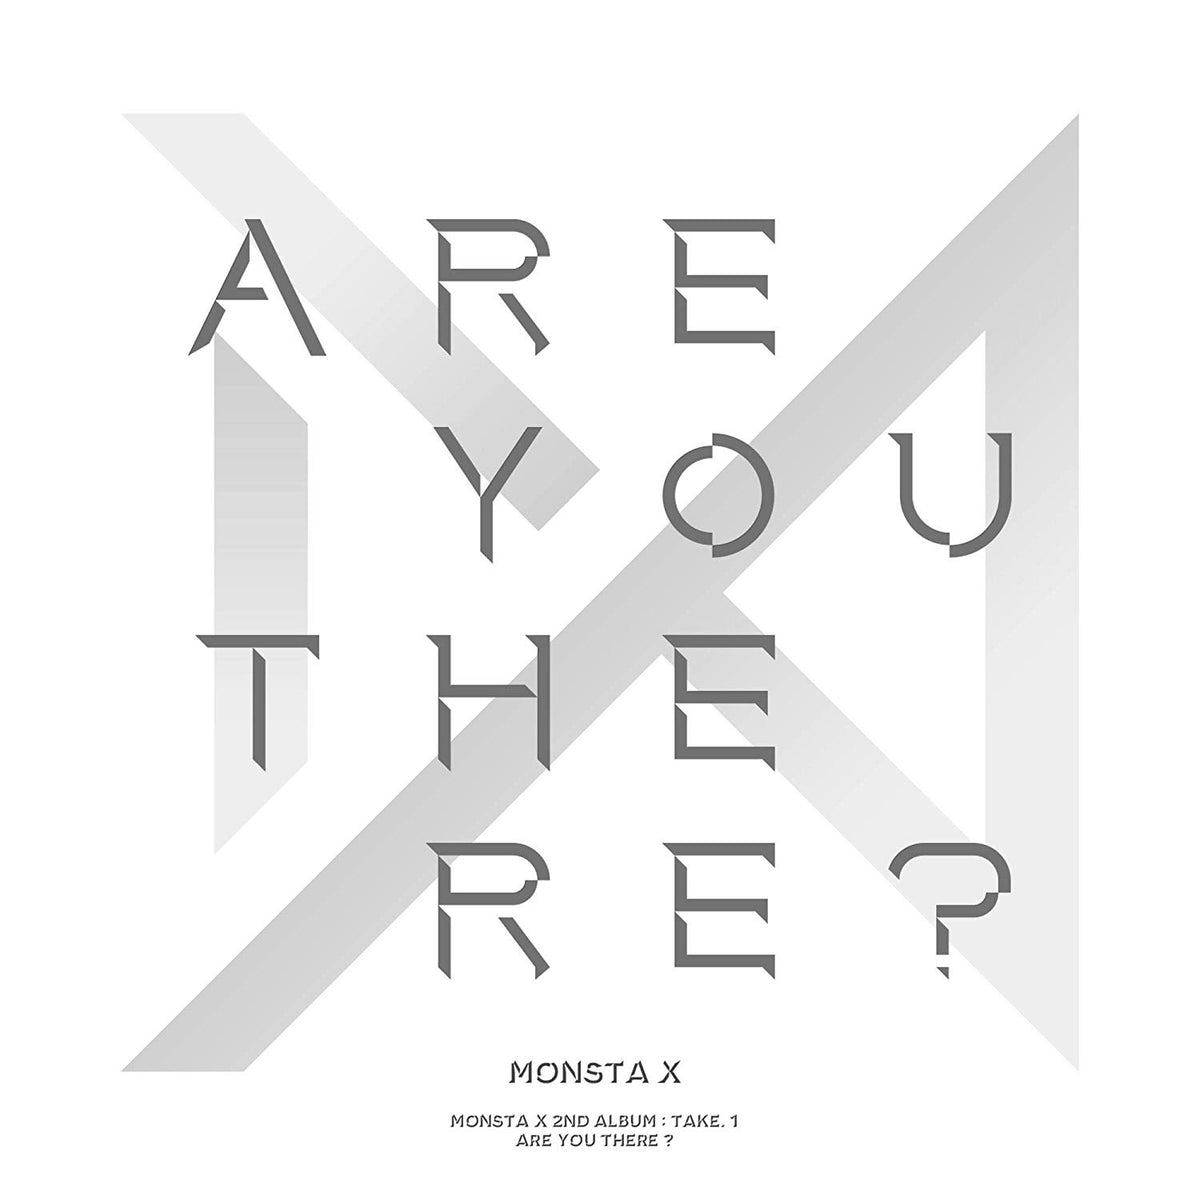 Monsta X - 2nd Album - Take.1 (Are You There?)